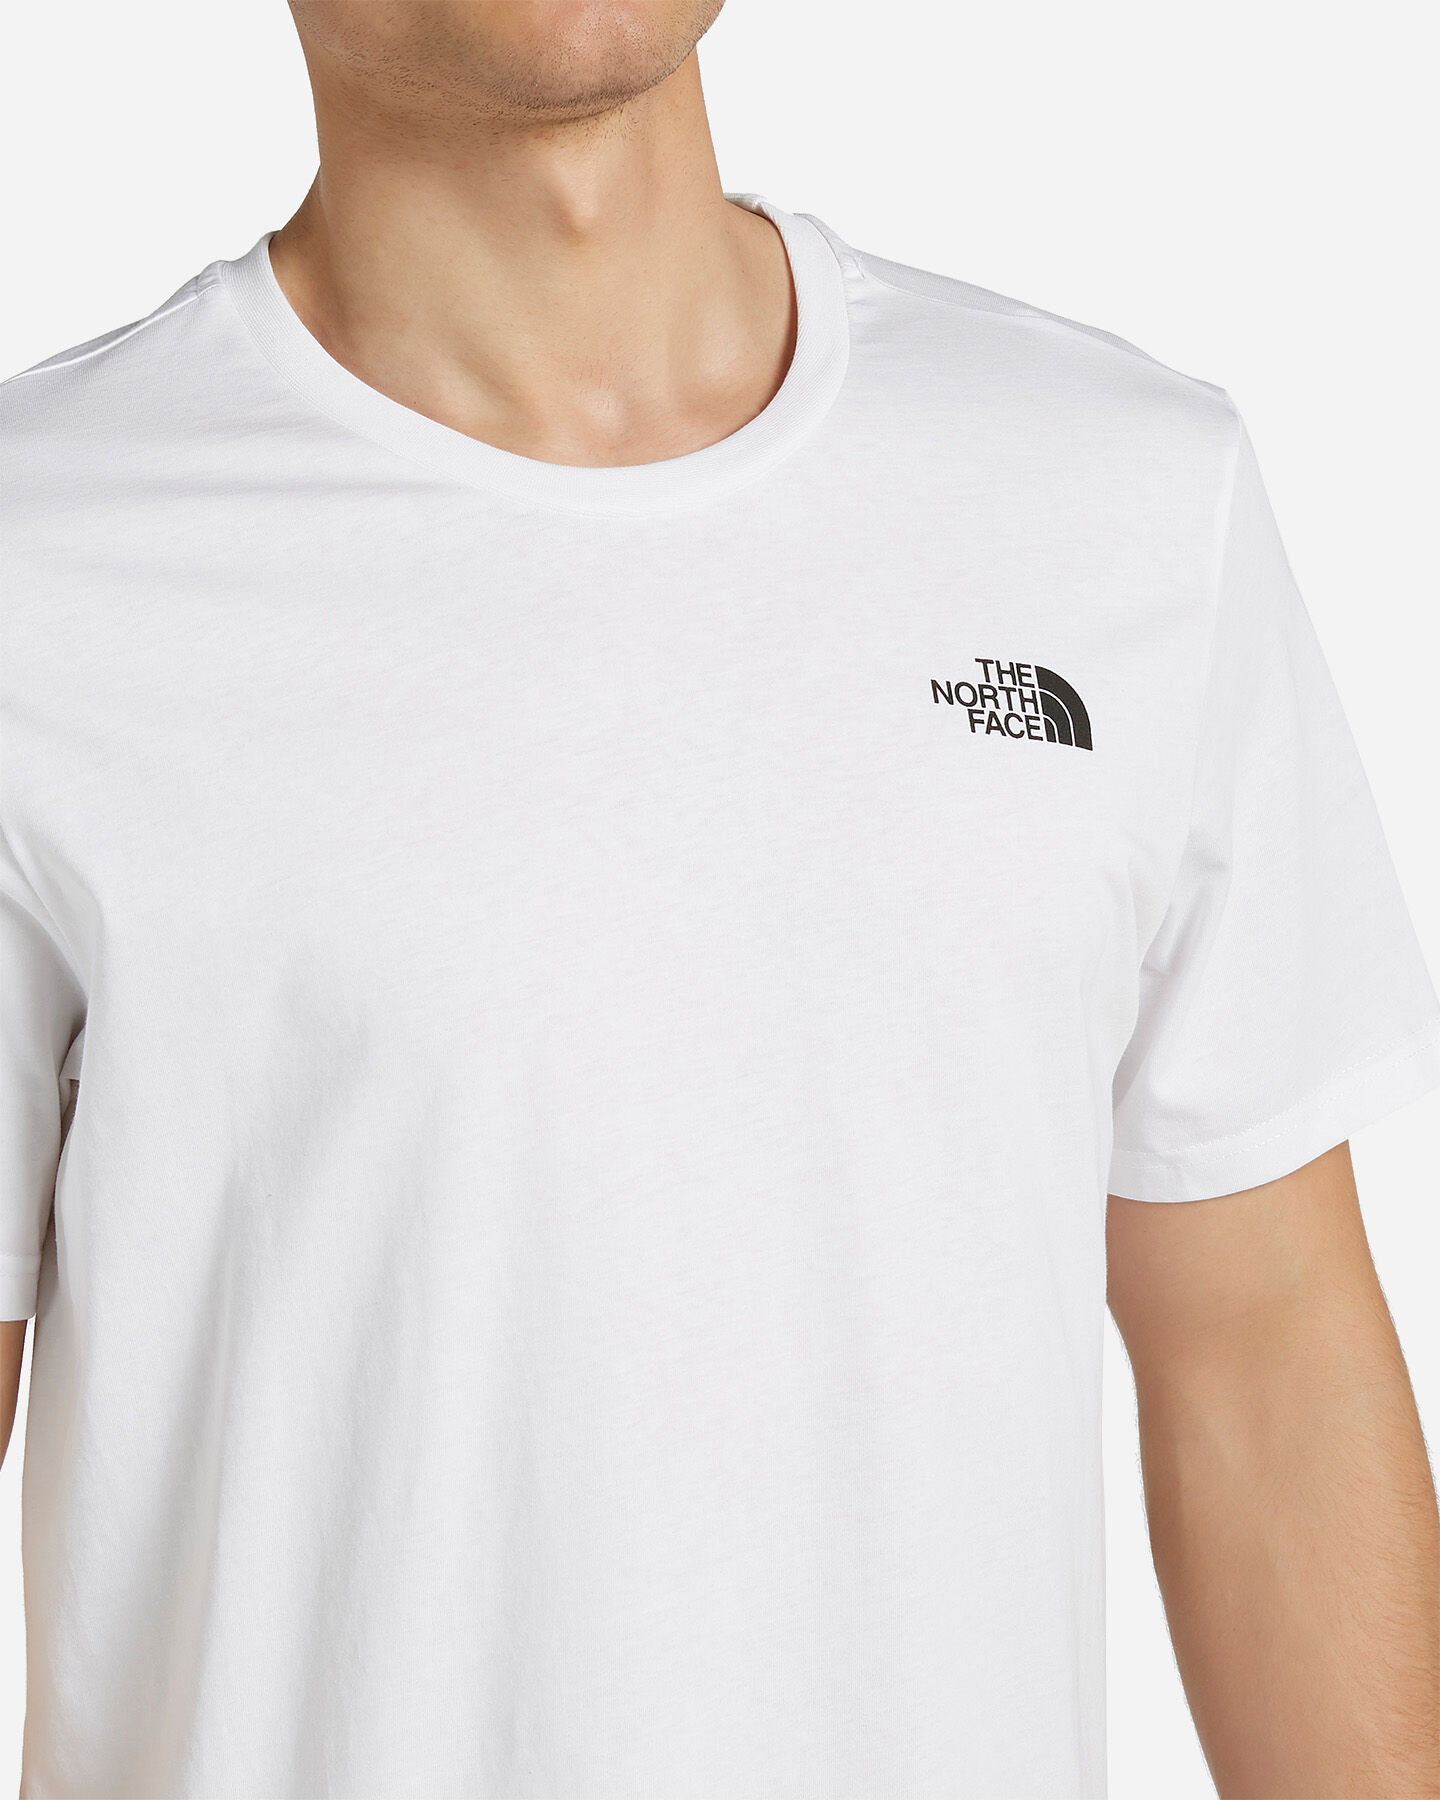  T-Shirt THE NORTH FACE SIMPLE DOME M S5015381|FN4|XXS scatto 4